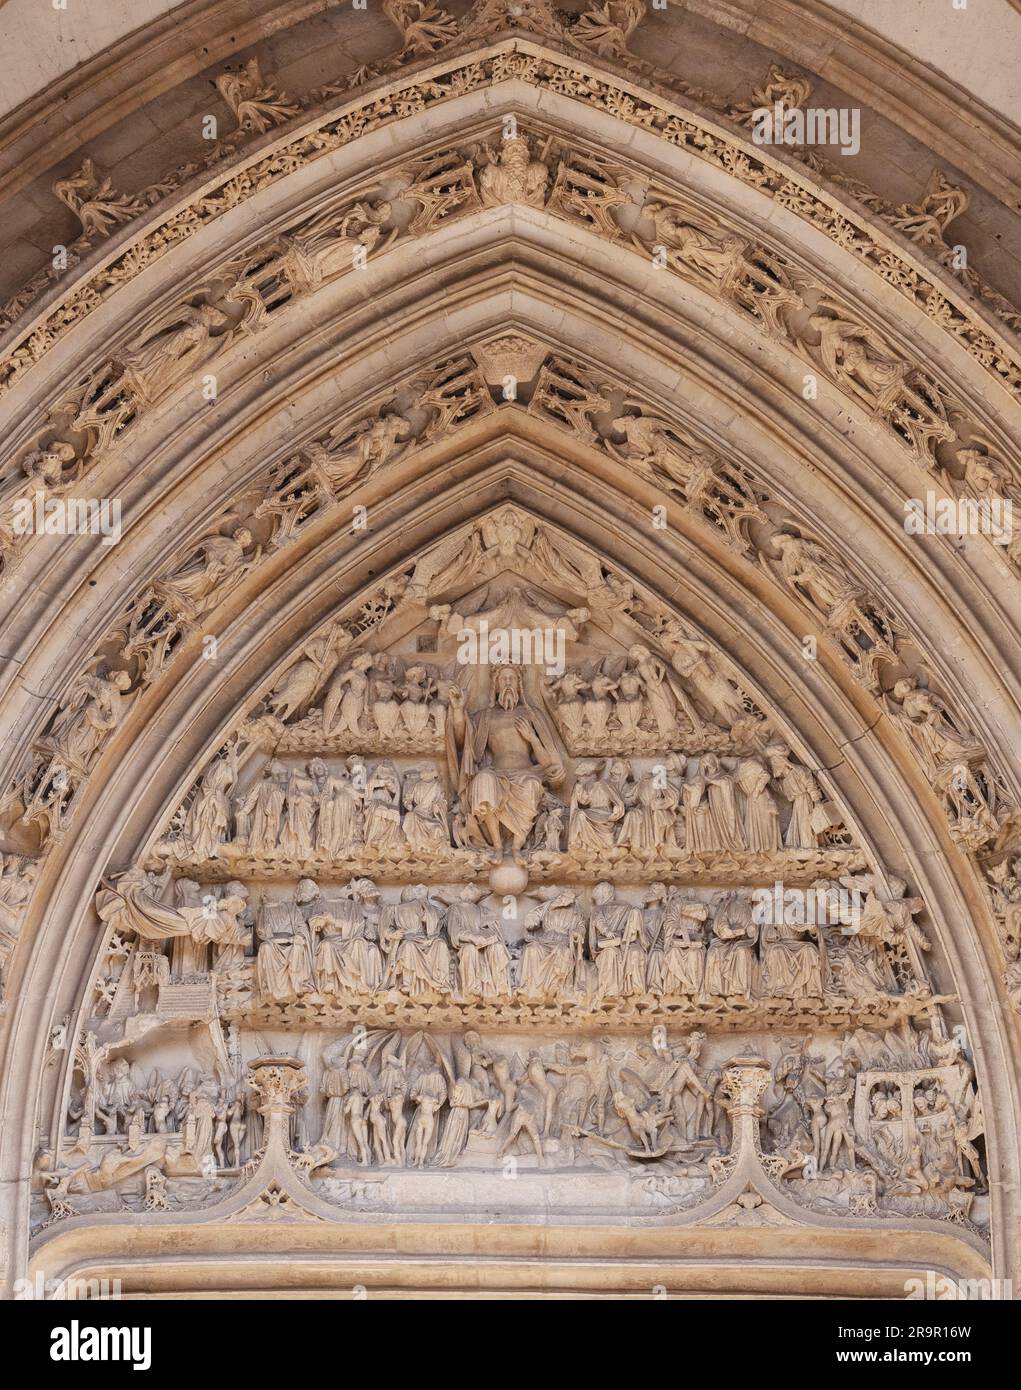 Gothic stone sculpture in the arch above the doors to Saint Maclou Church Rouen France showing Jesus Christ and people heading to heaven or hell. Stock Photo